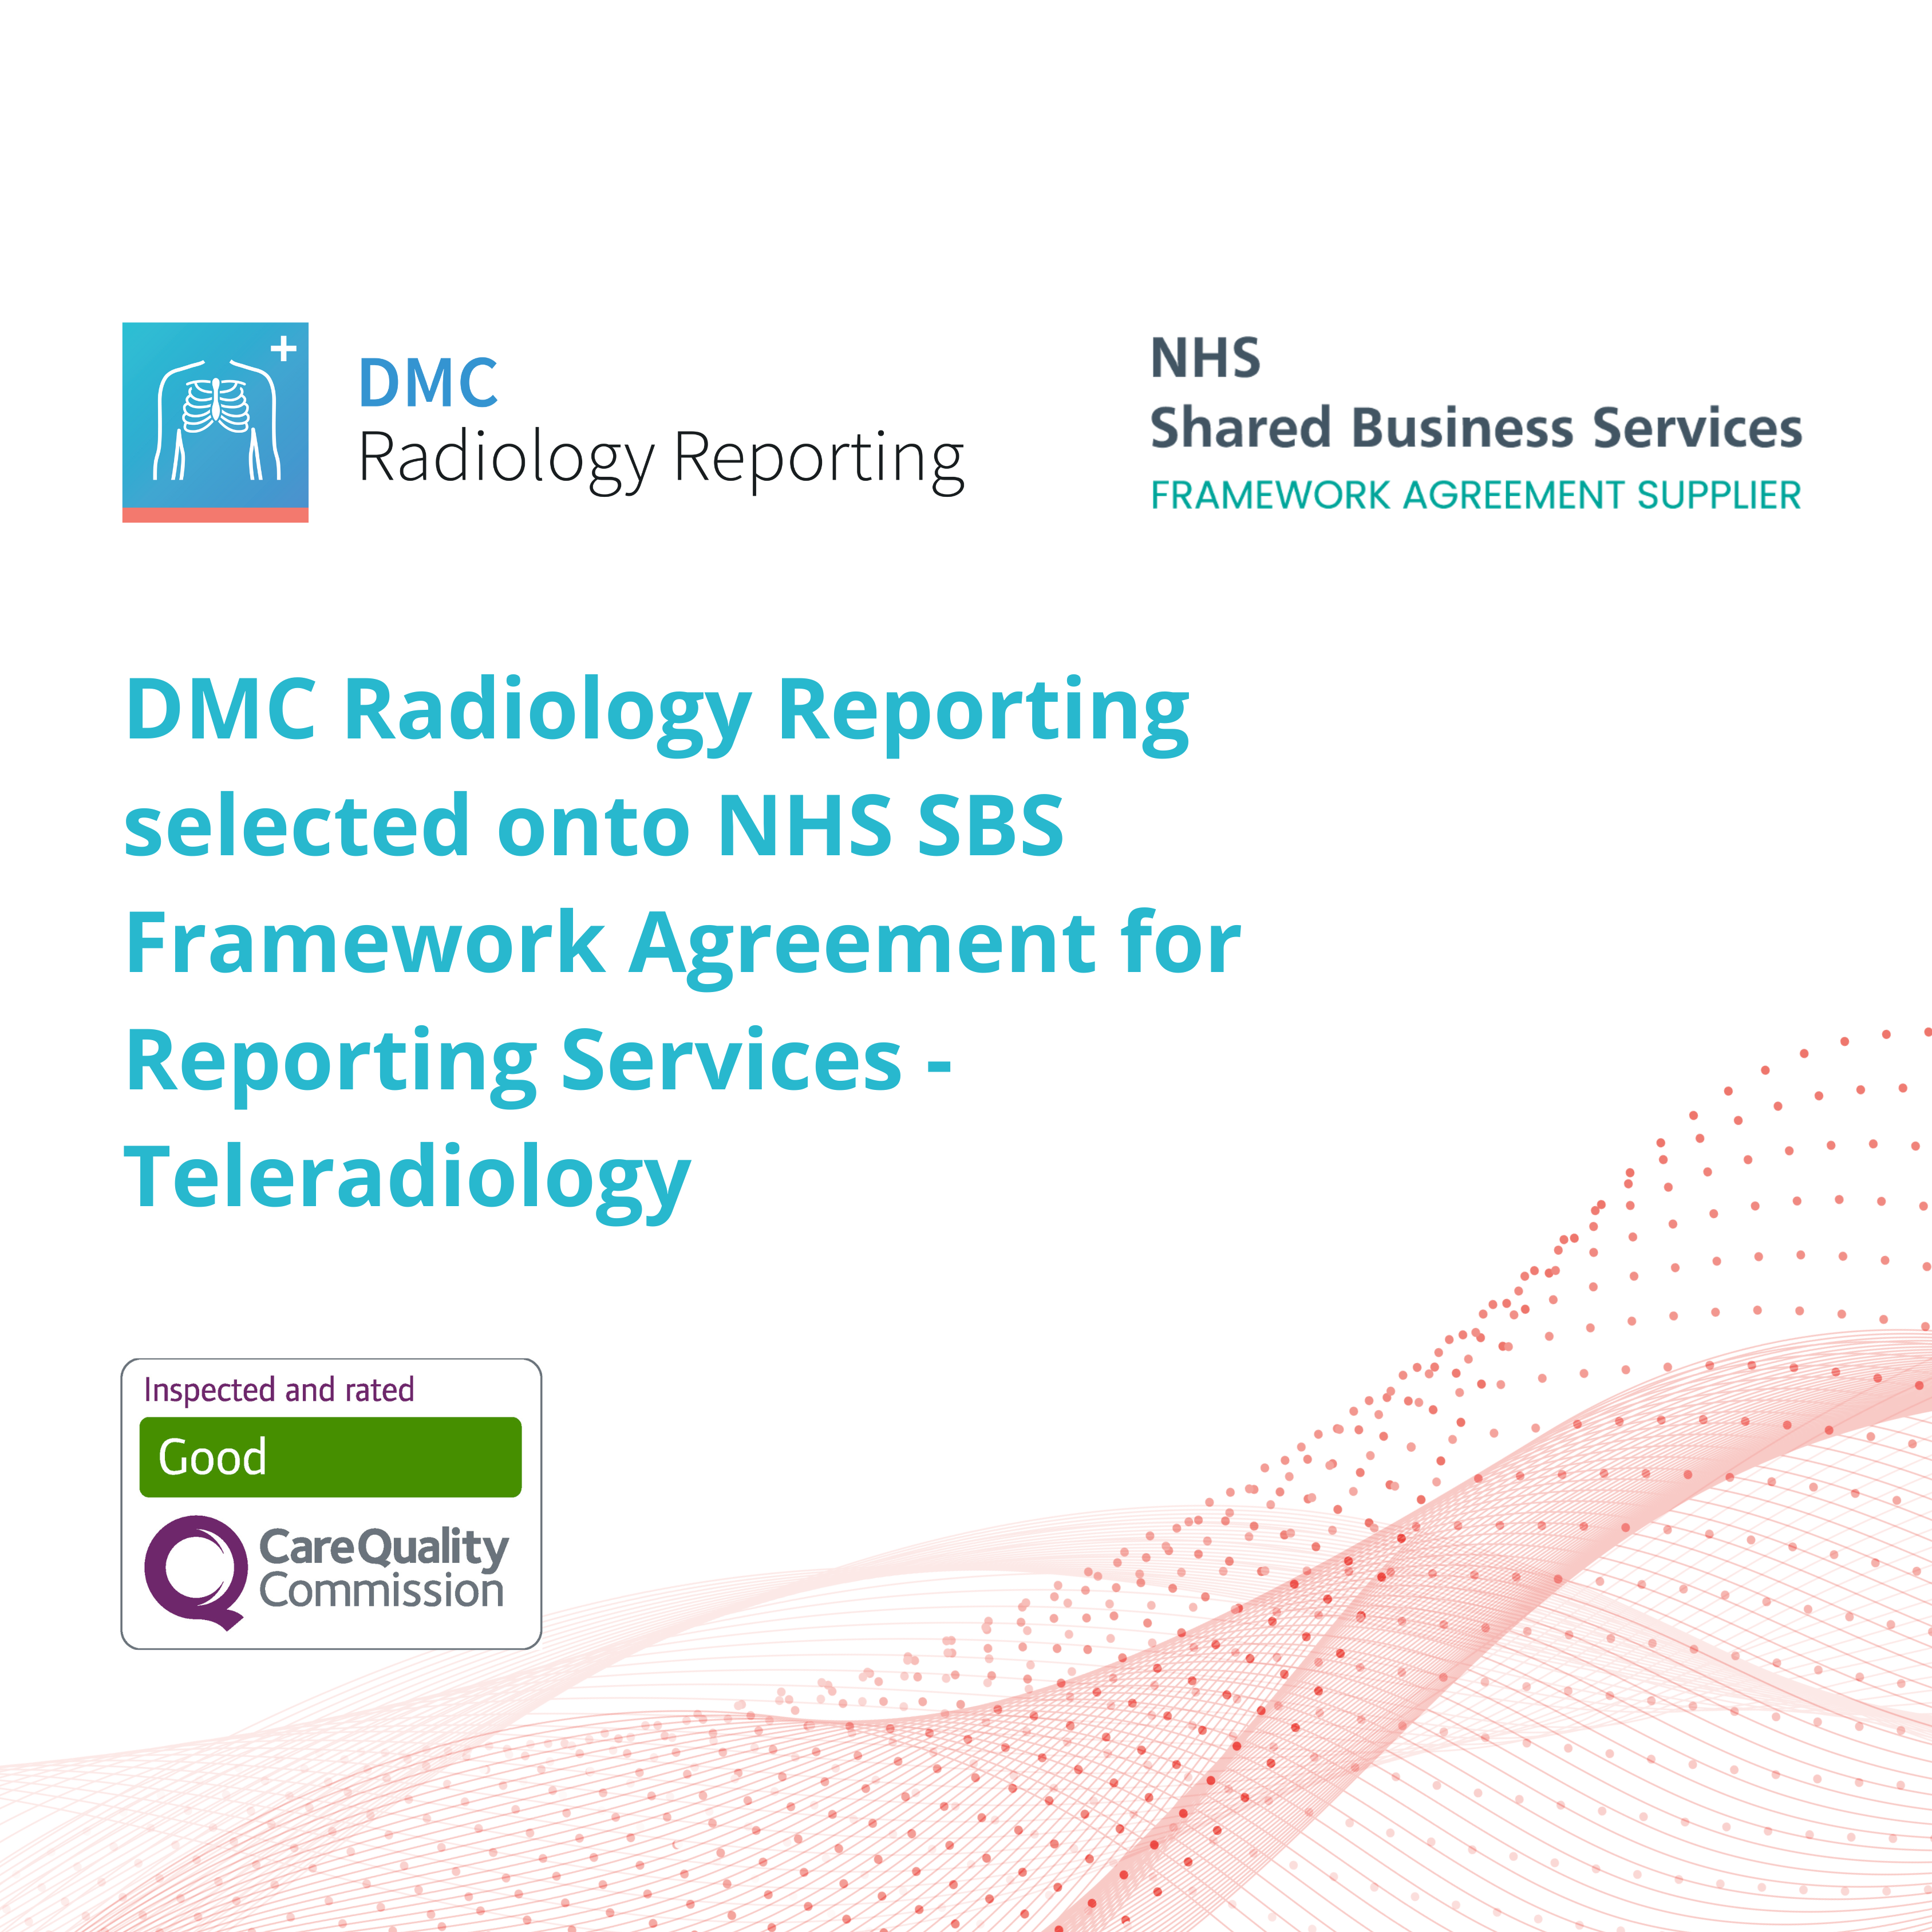 DMC Imaging, also known as DMC Radiology Reporting, is proud to be selected onto the NHS Shared Business Services (SBS) framework agreement for Reporting Services - Teleradiology, which runs to 31 July 2027.